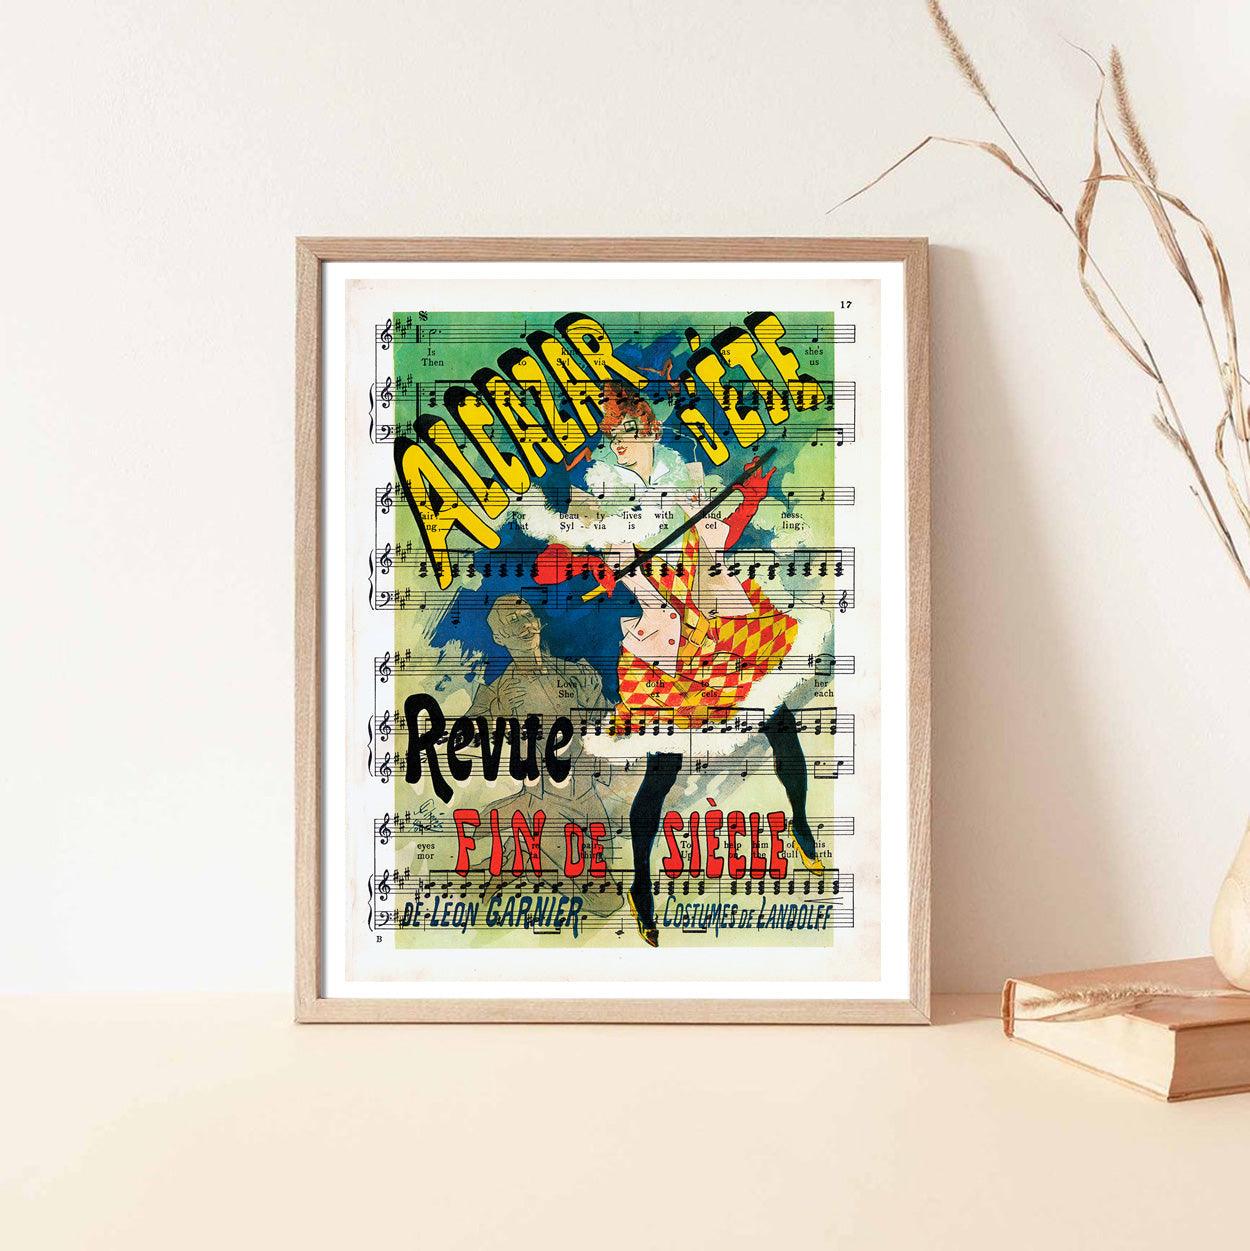 Give your home decor a touch of elegance through our exquisite Revue Fin de Siècle, Alcazar d'été reproduction poster. The artwork is a collage with a poster for Horses in art design by Jules Chéret (French graphic designer, 1836-1932). Year of created 1890.